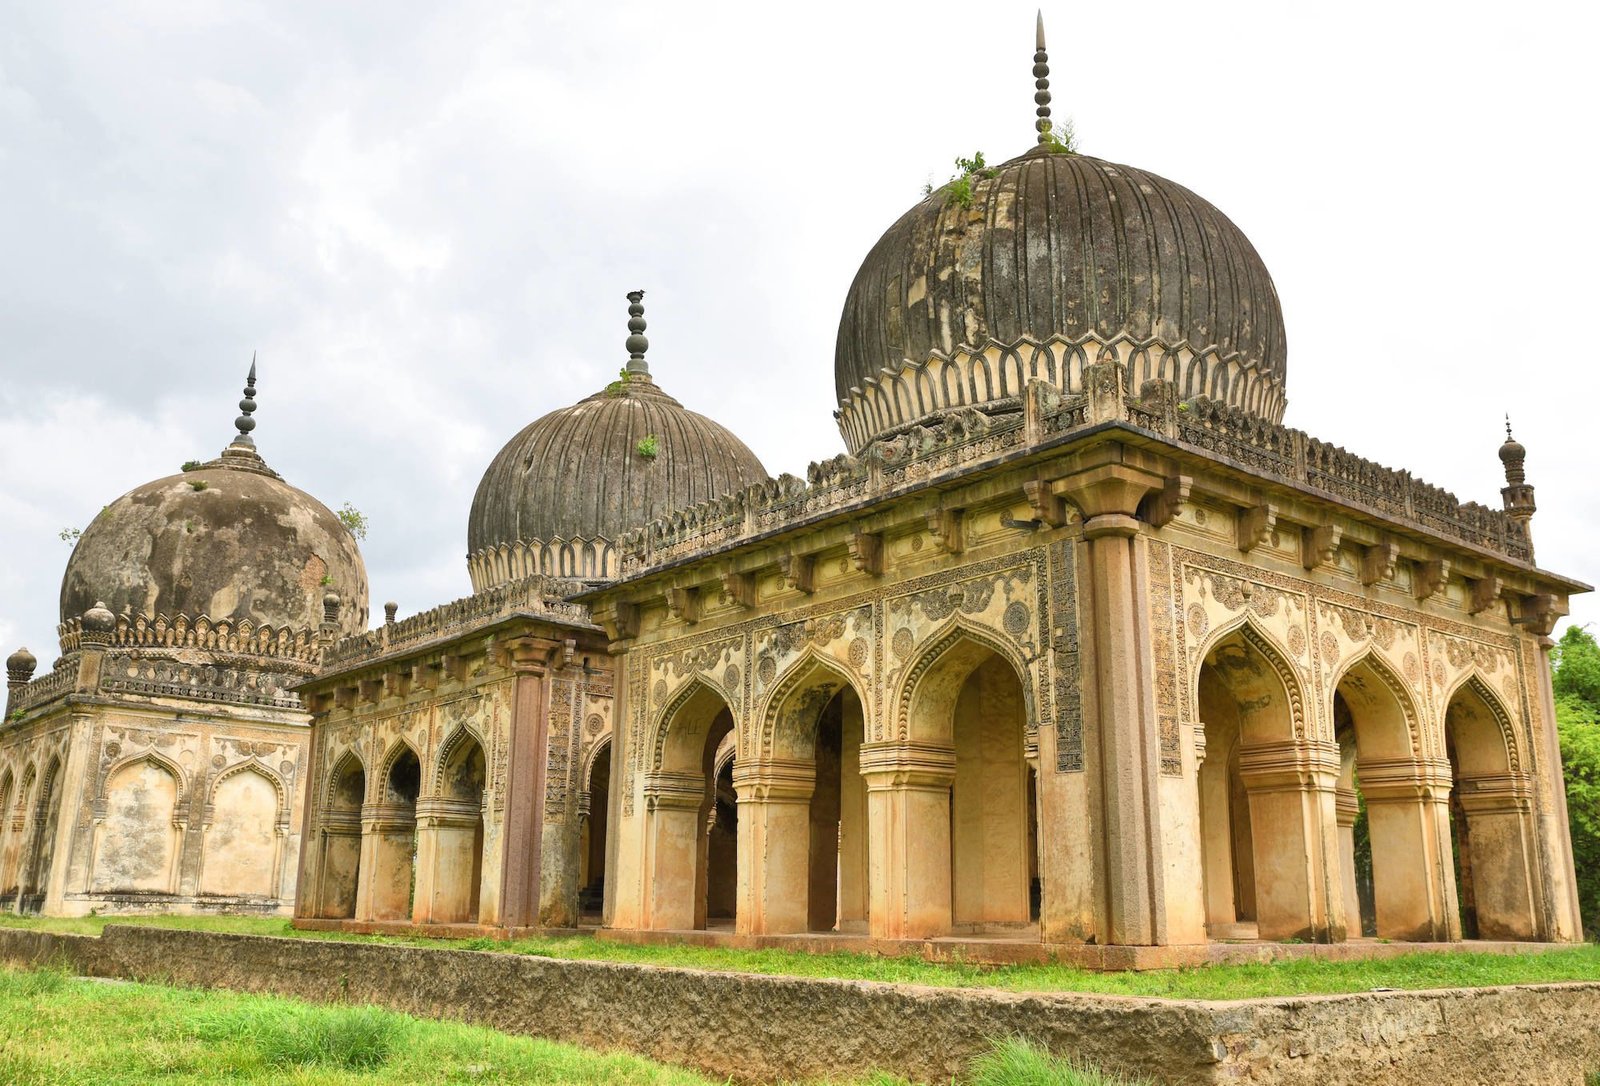 Whispering Tales of Grandeur: A Journey Through the Qutb Shahi Tombs